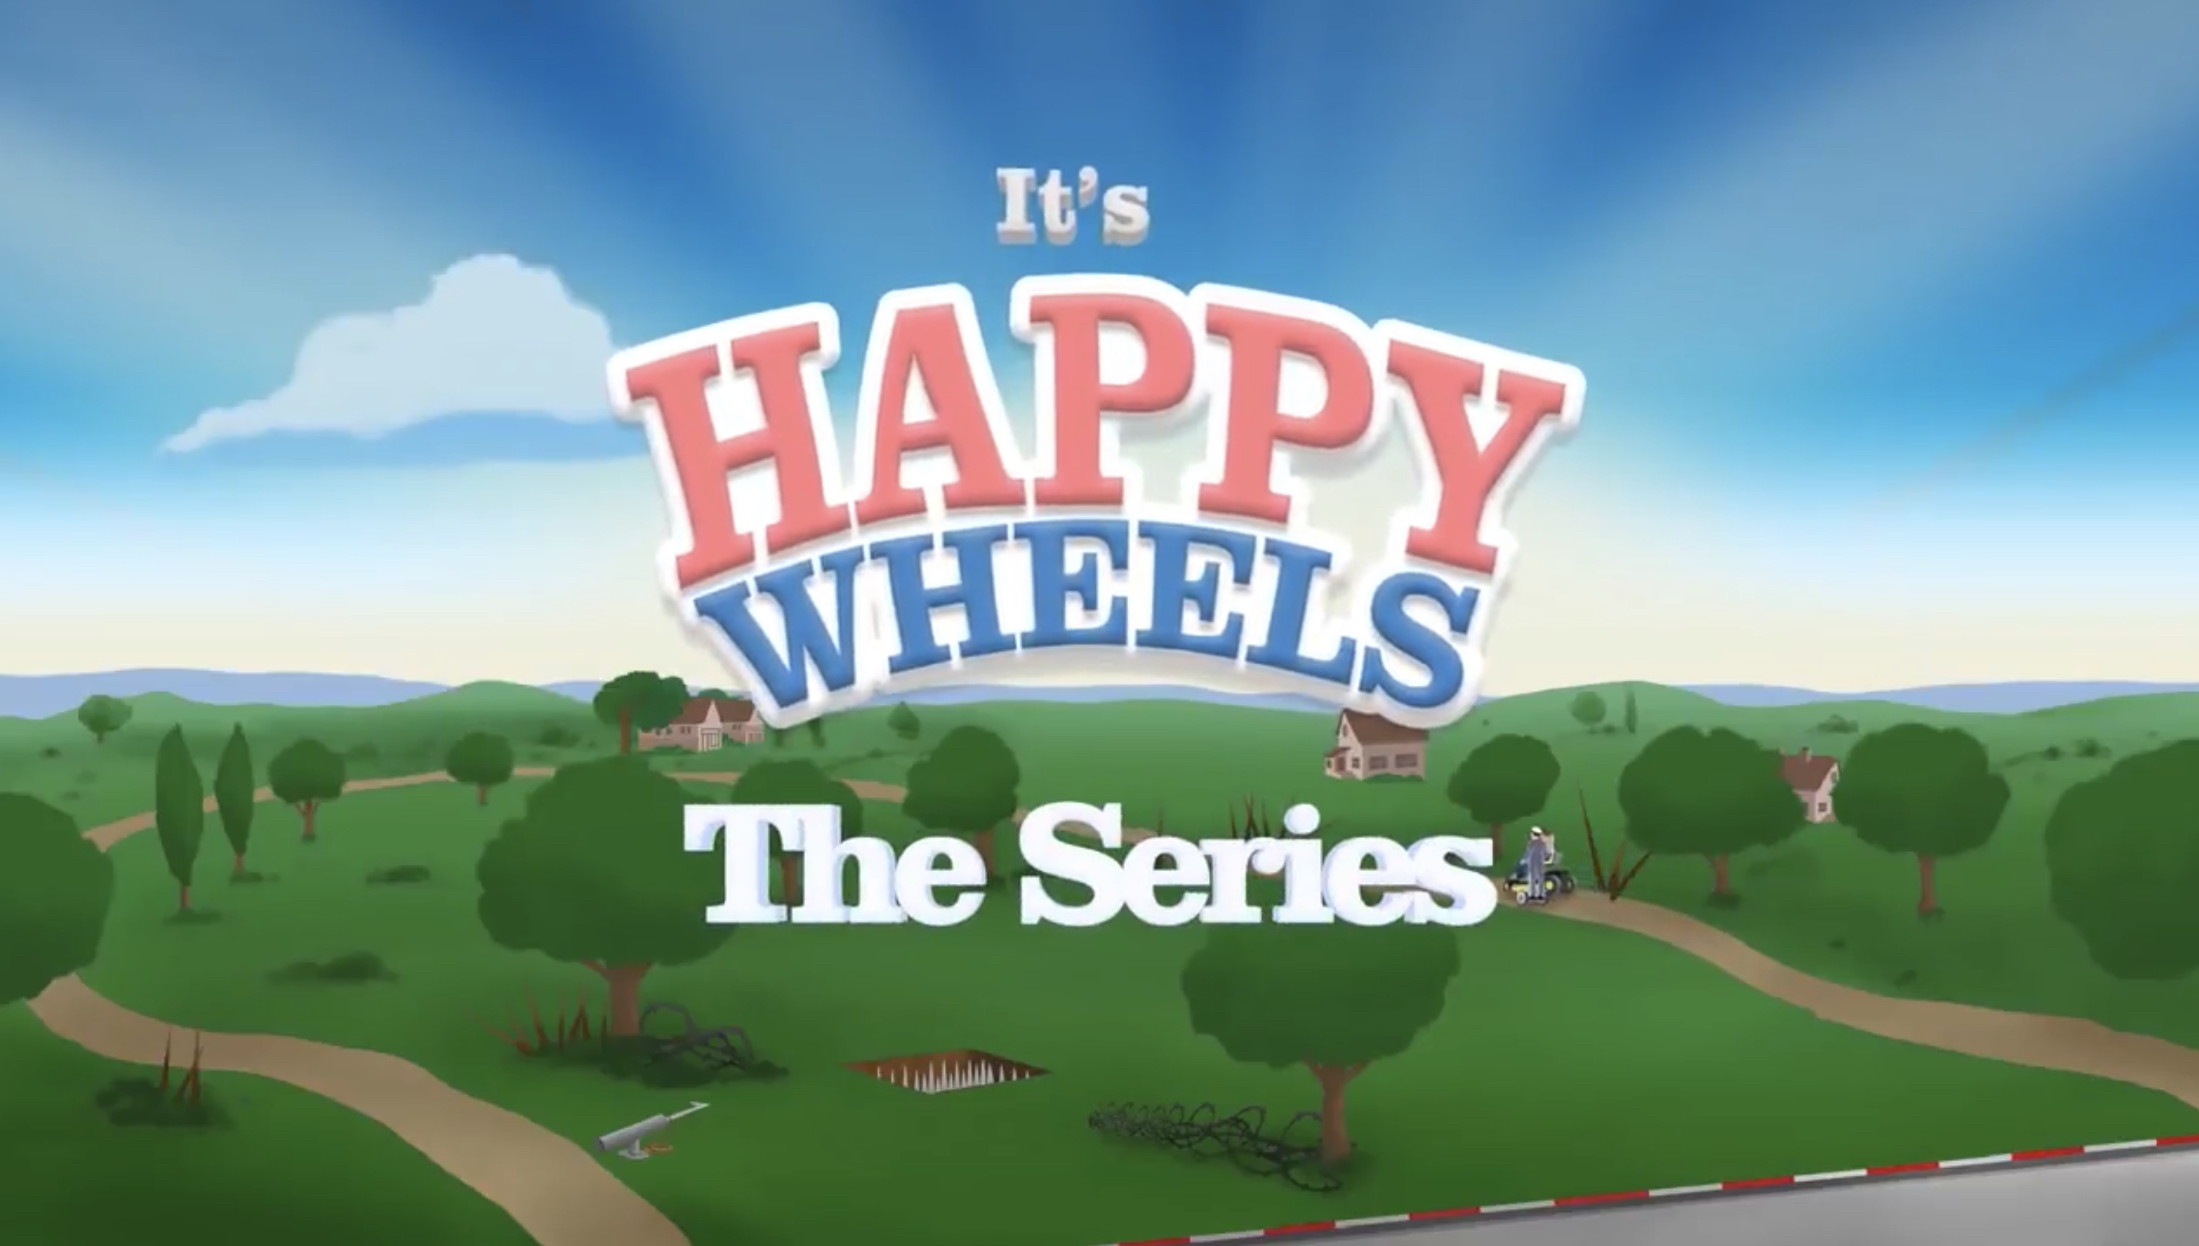 Happy Wheels: The Series Episode 7 (Stephen Saves The Day) - Happy Wheels: The Series (partially lost go90 animated series based on Flash game; 2016)